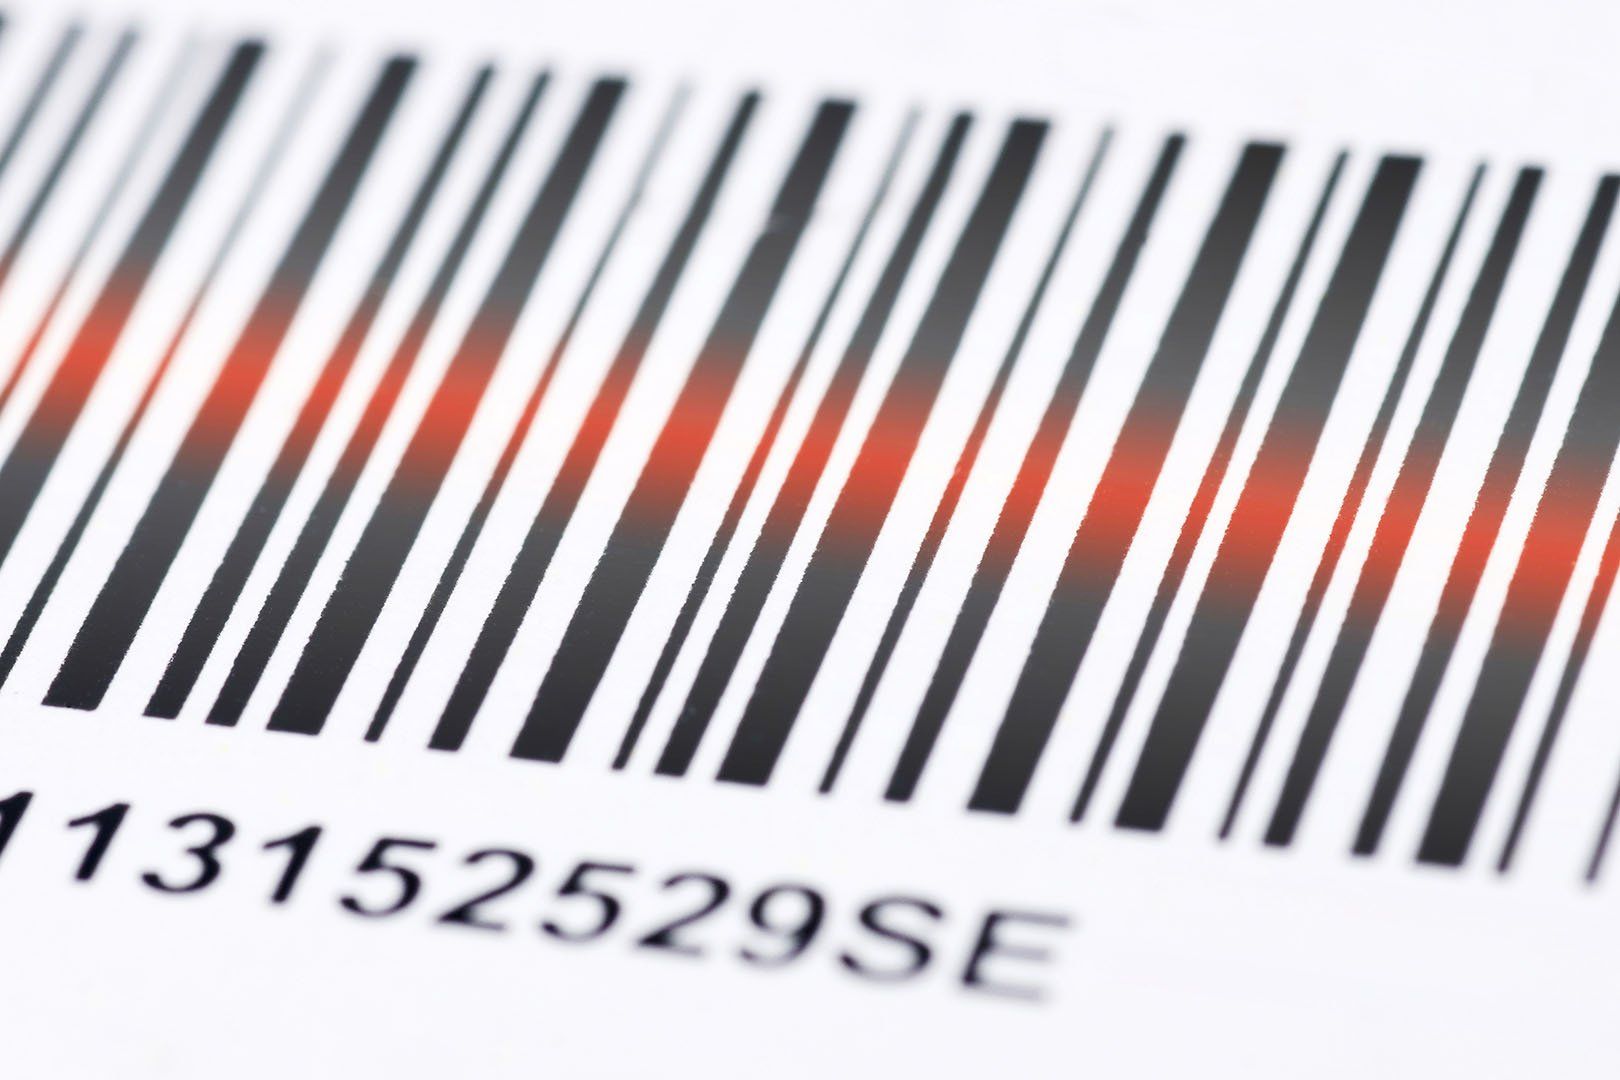 UPC Barcode with scan light